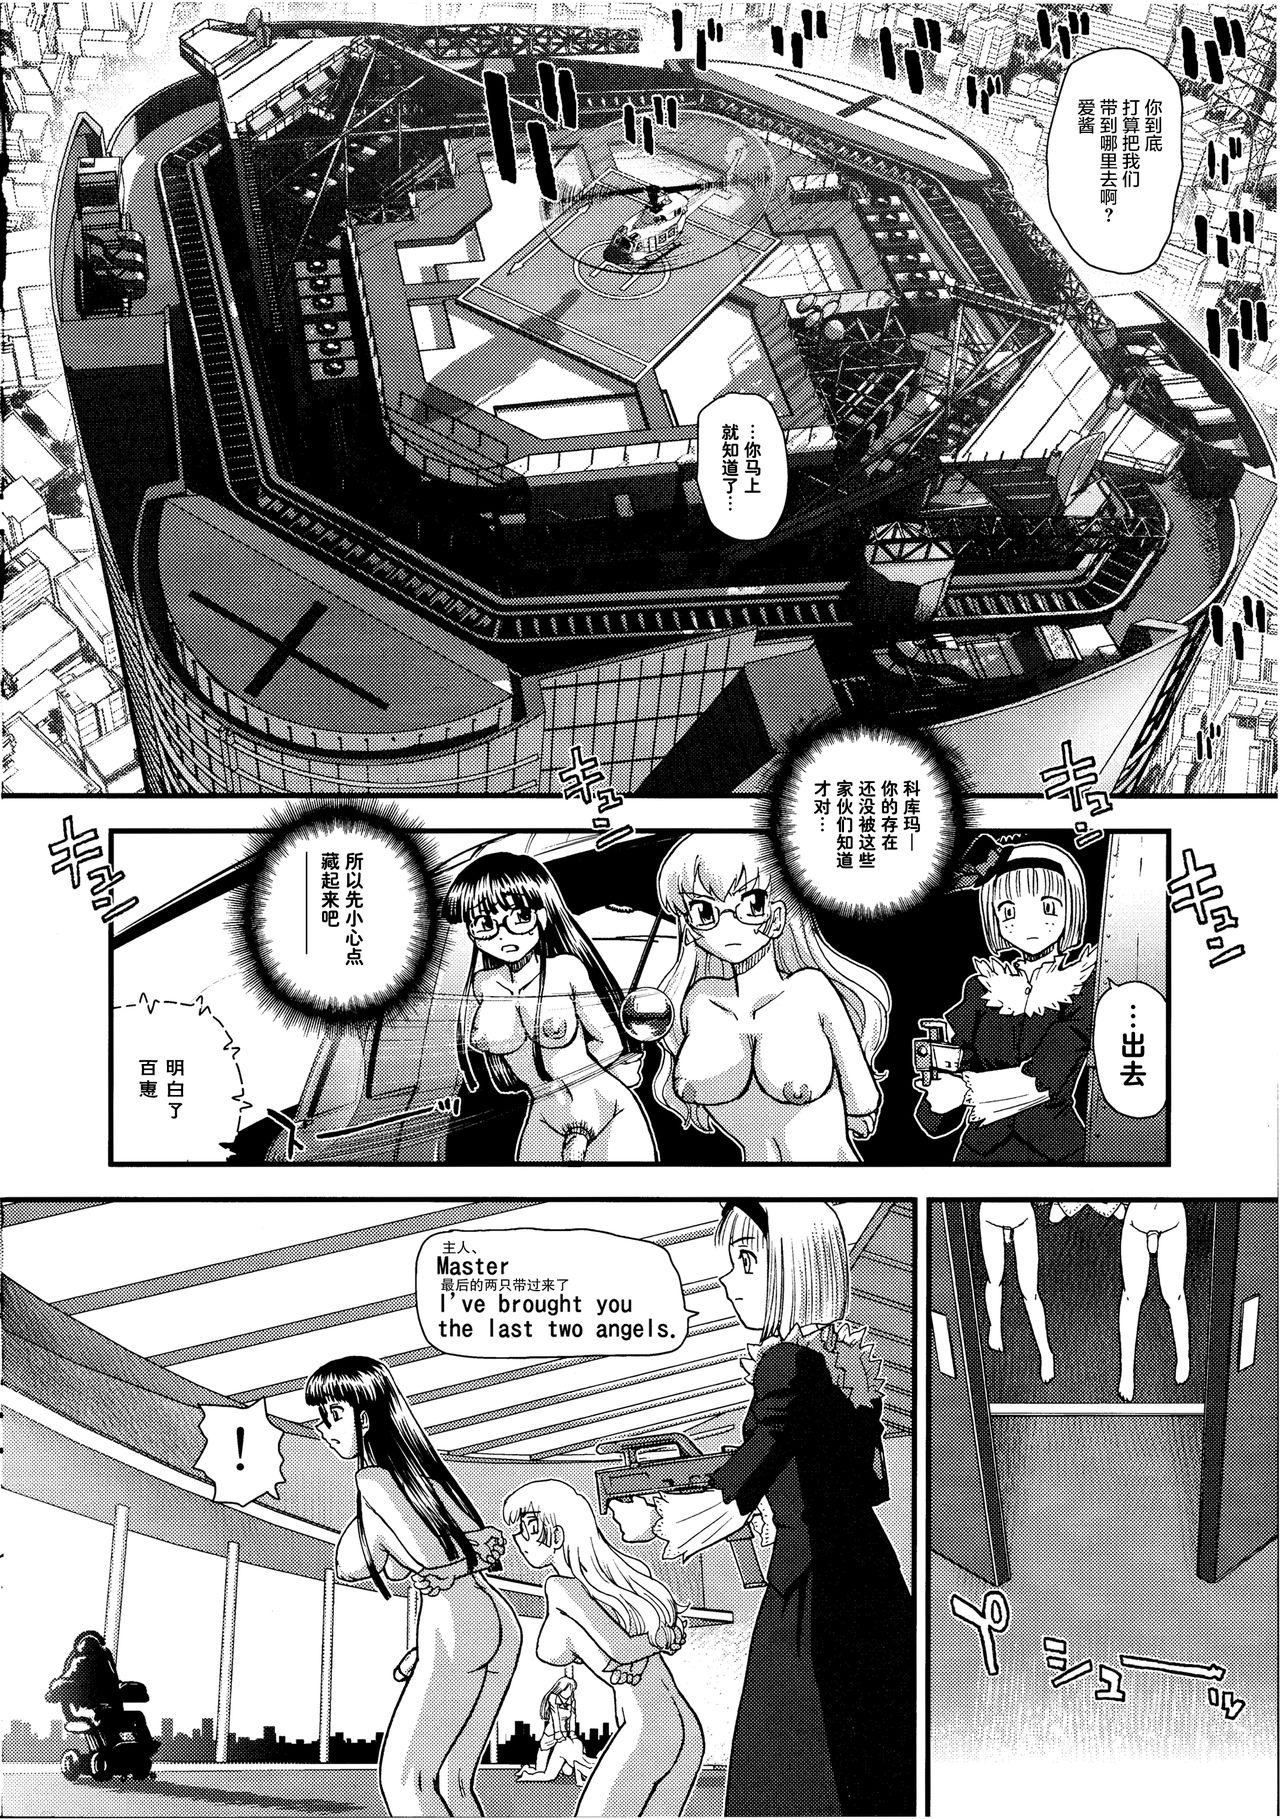 (C81) [Behind Moon (Q)] Dulce Report 14 | 达西报告 14 [Chinese] [鬼畜王汉化组] [Decensored] page 6 full